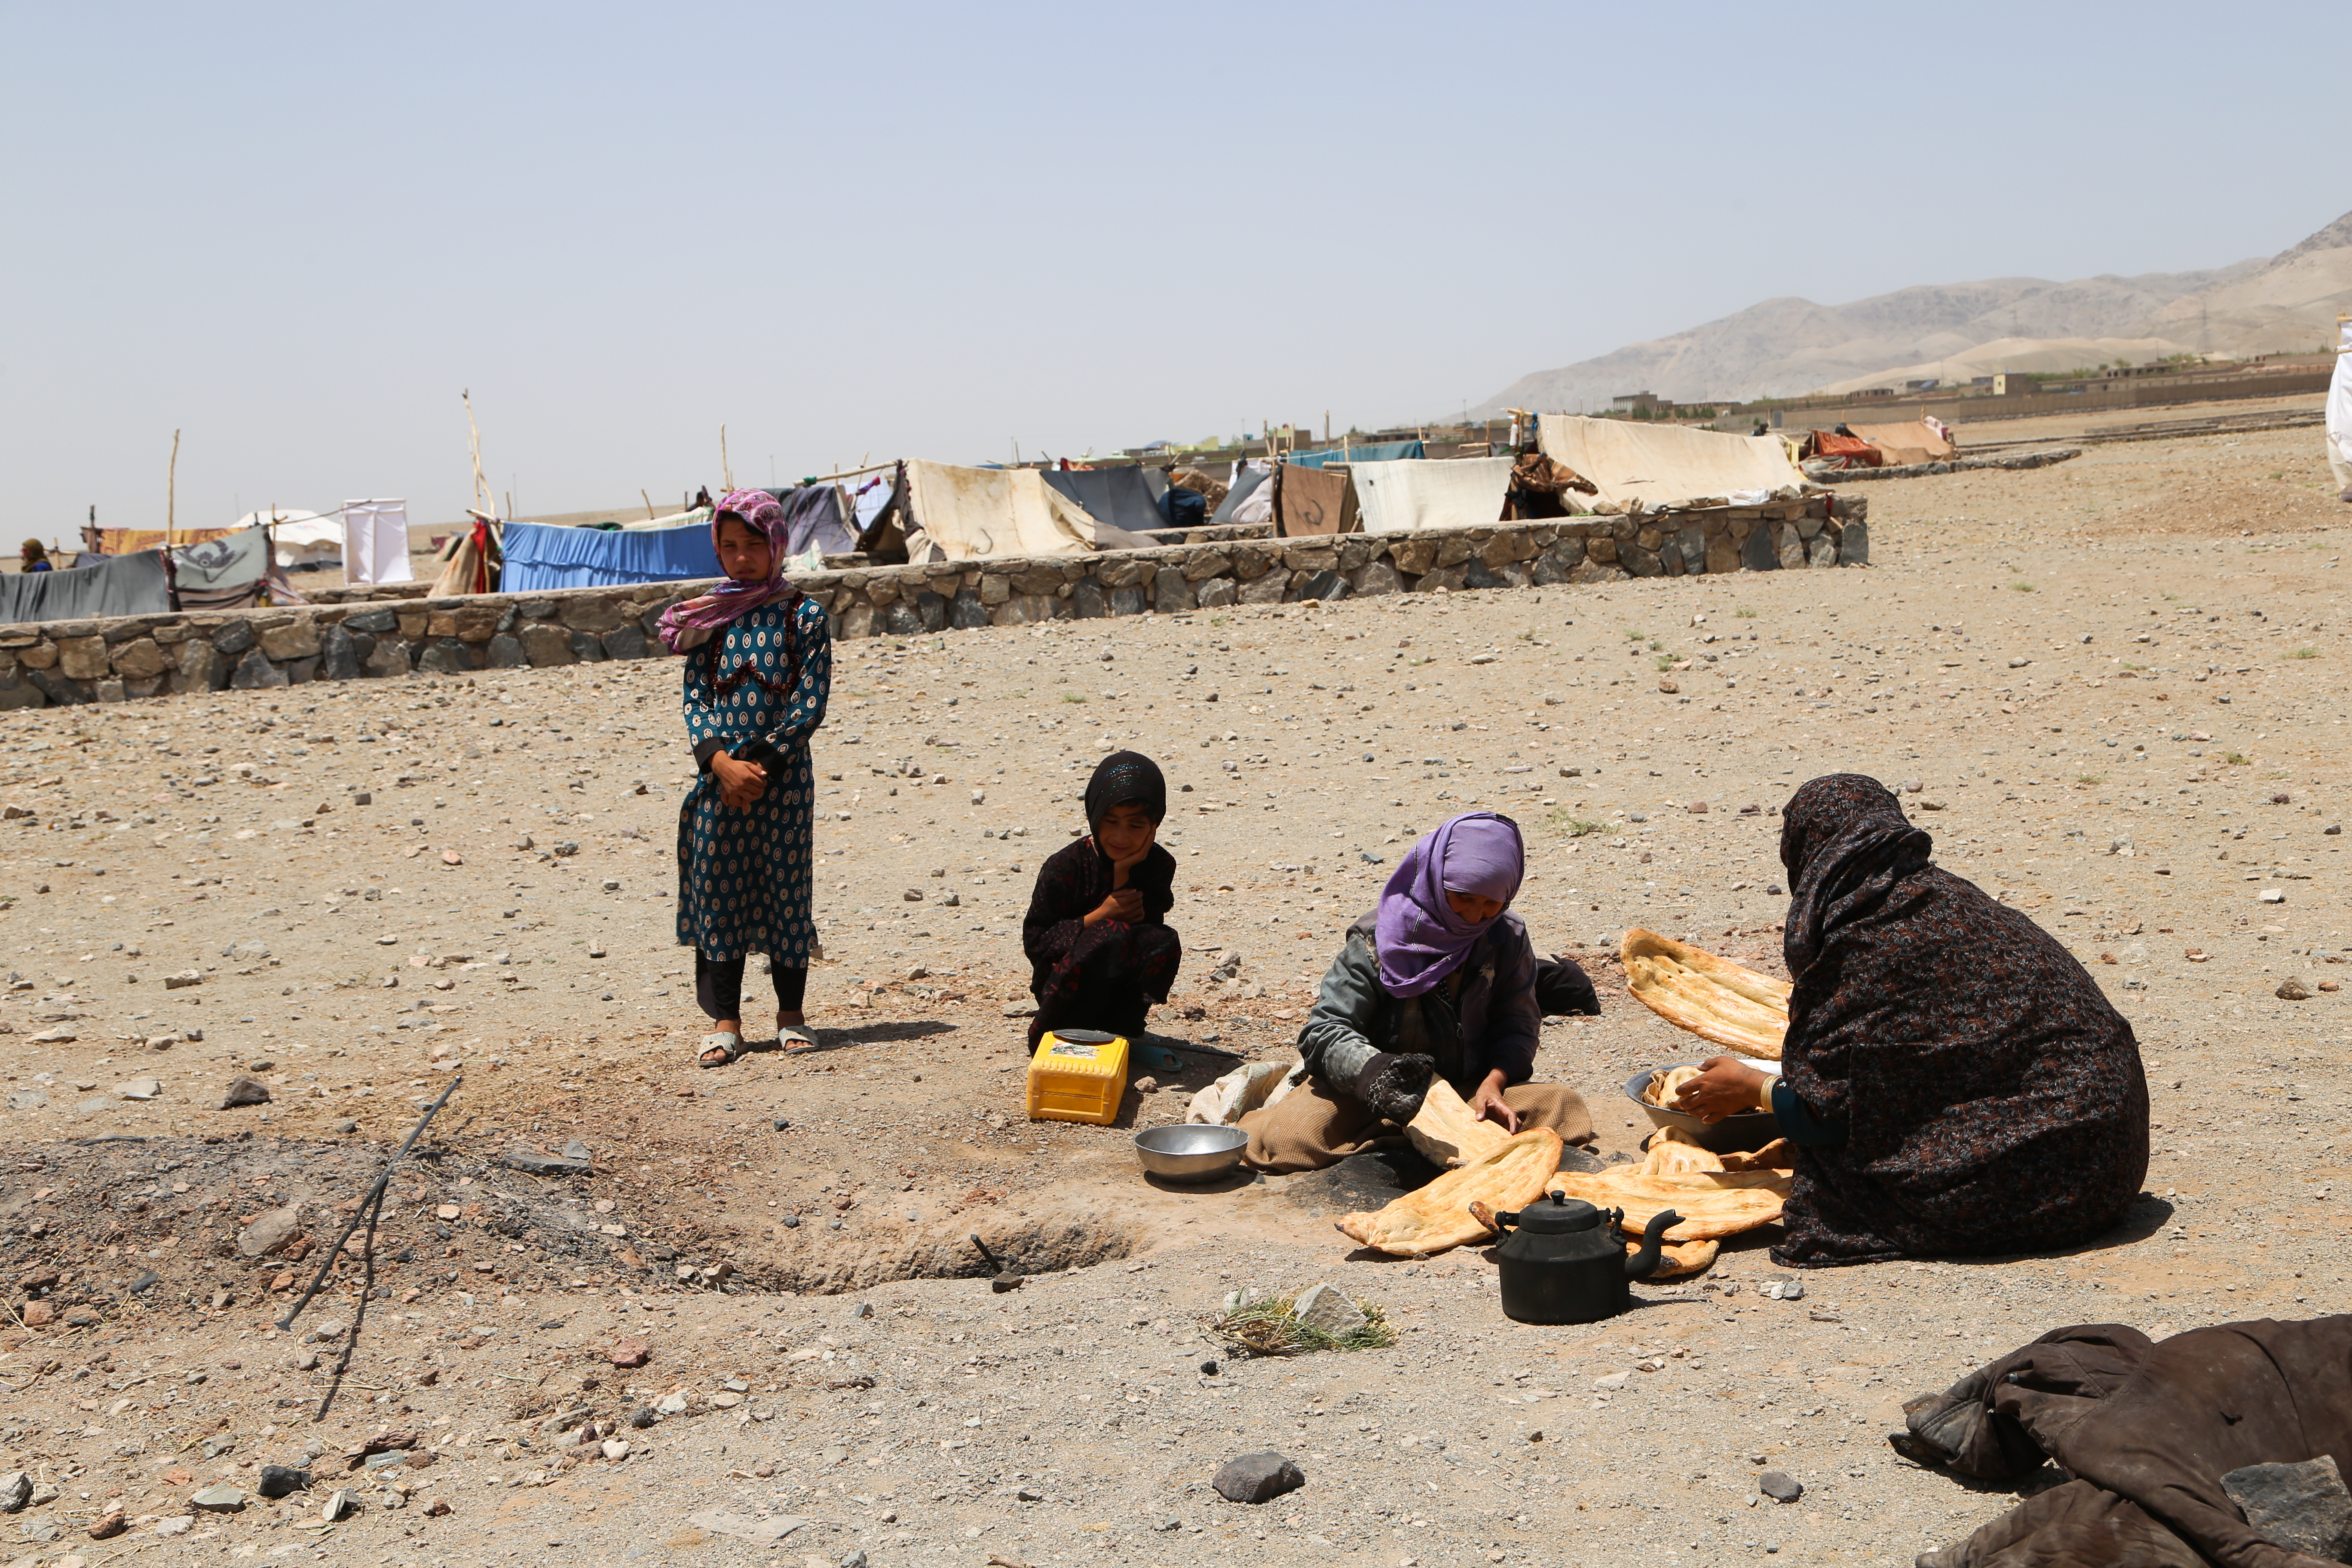 An Afghan family of four sit on the ground outside together and share food